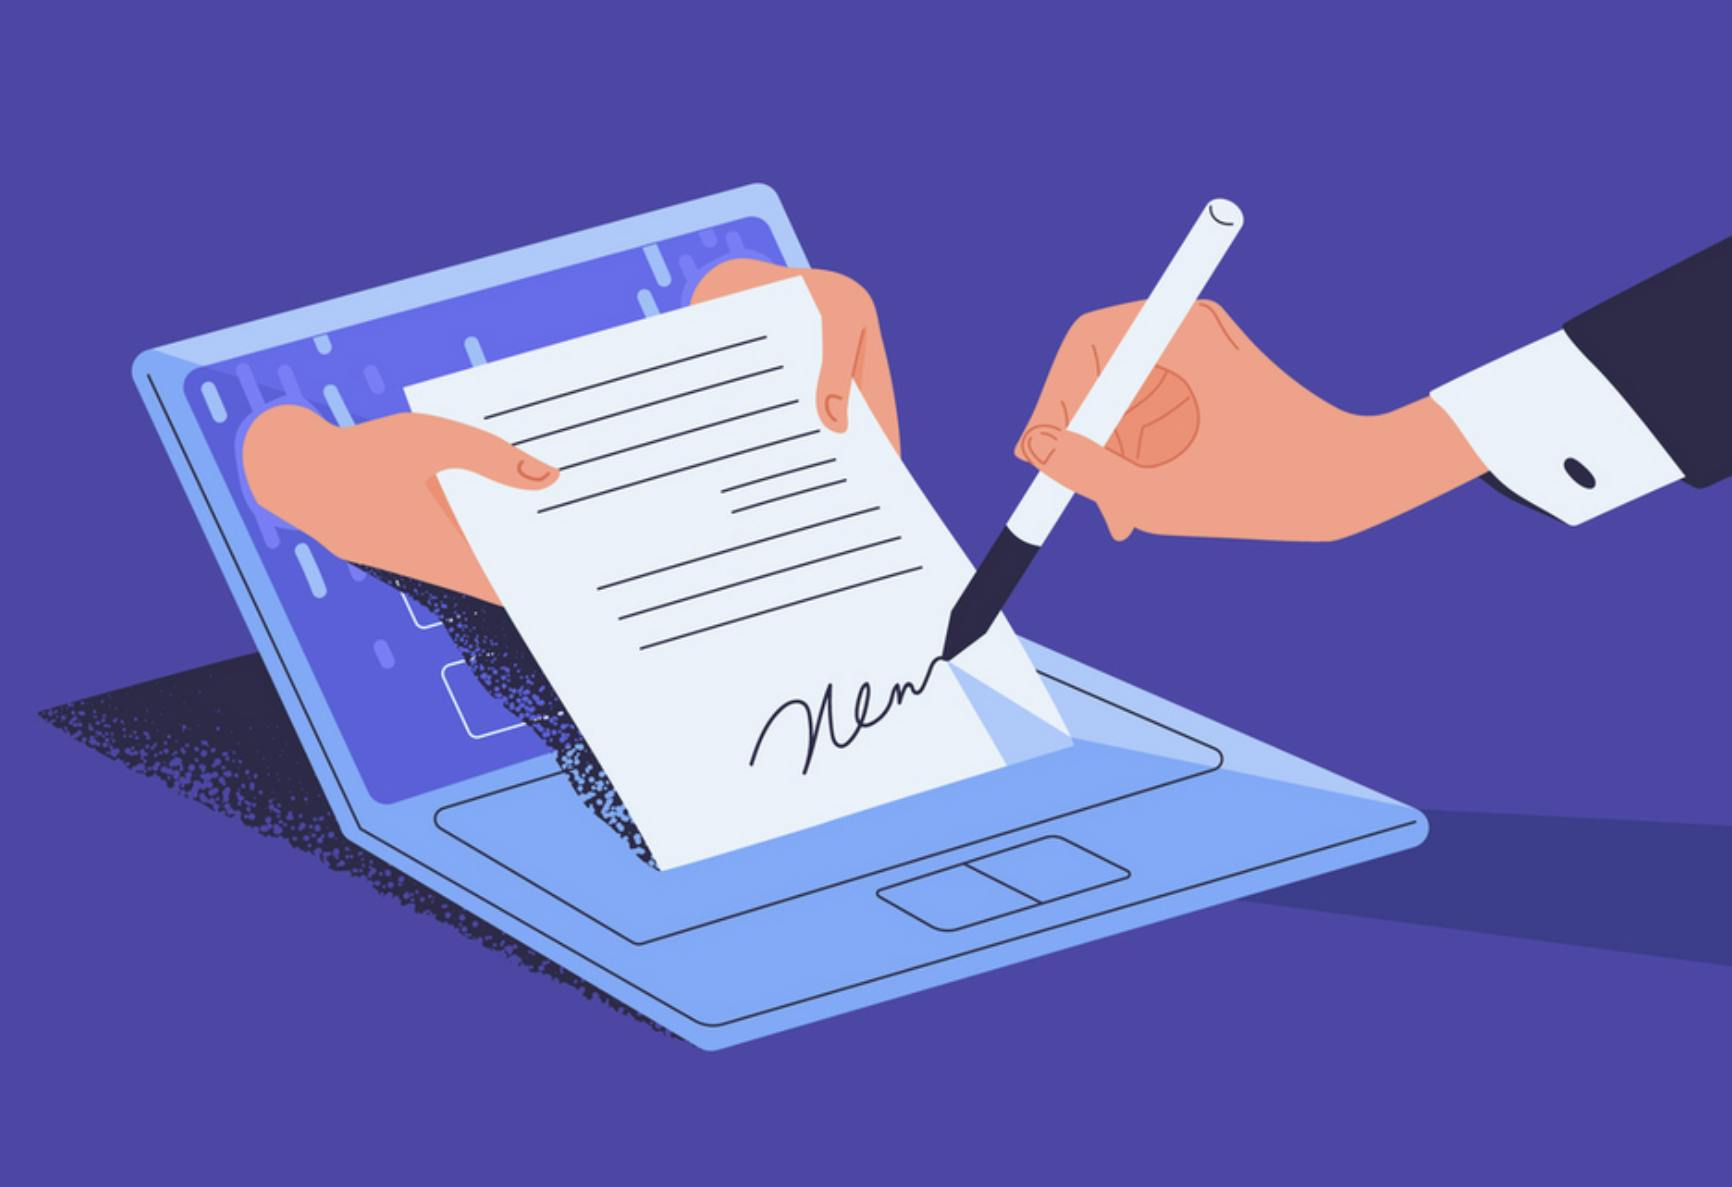 Illustration of an open laptop with hands coming out of the screen holding a document which another hand is signing. Related to Social security administration, digital social security, data integration and social security, social security modernization.